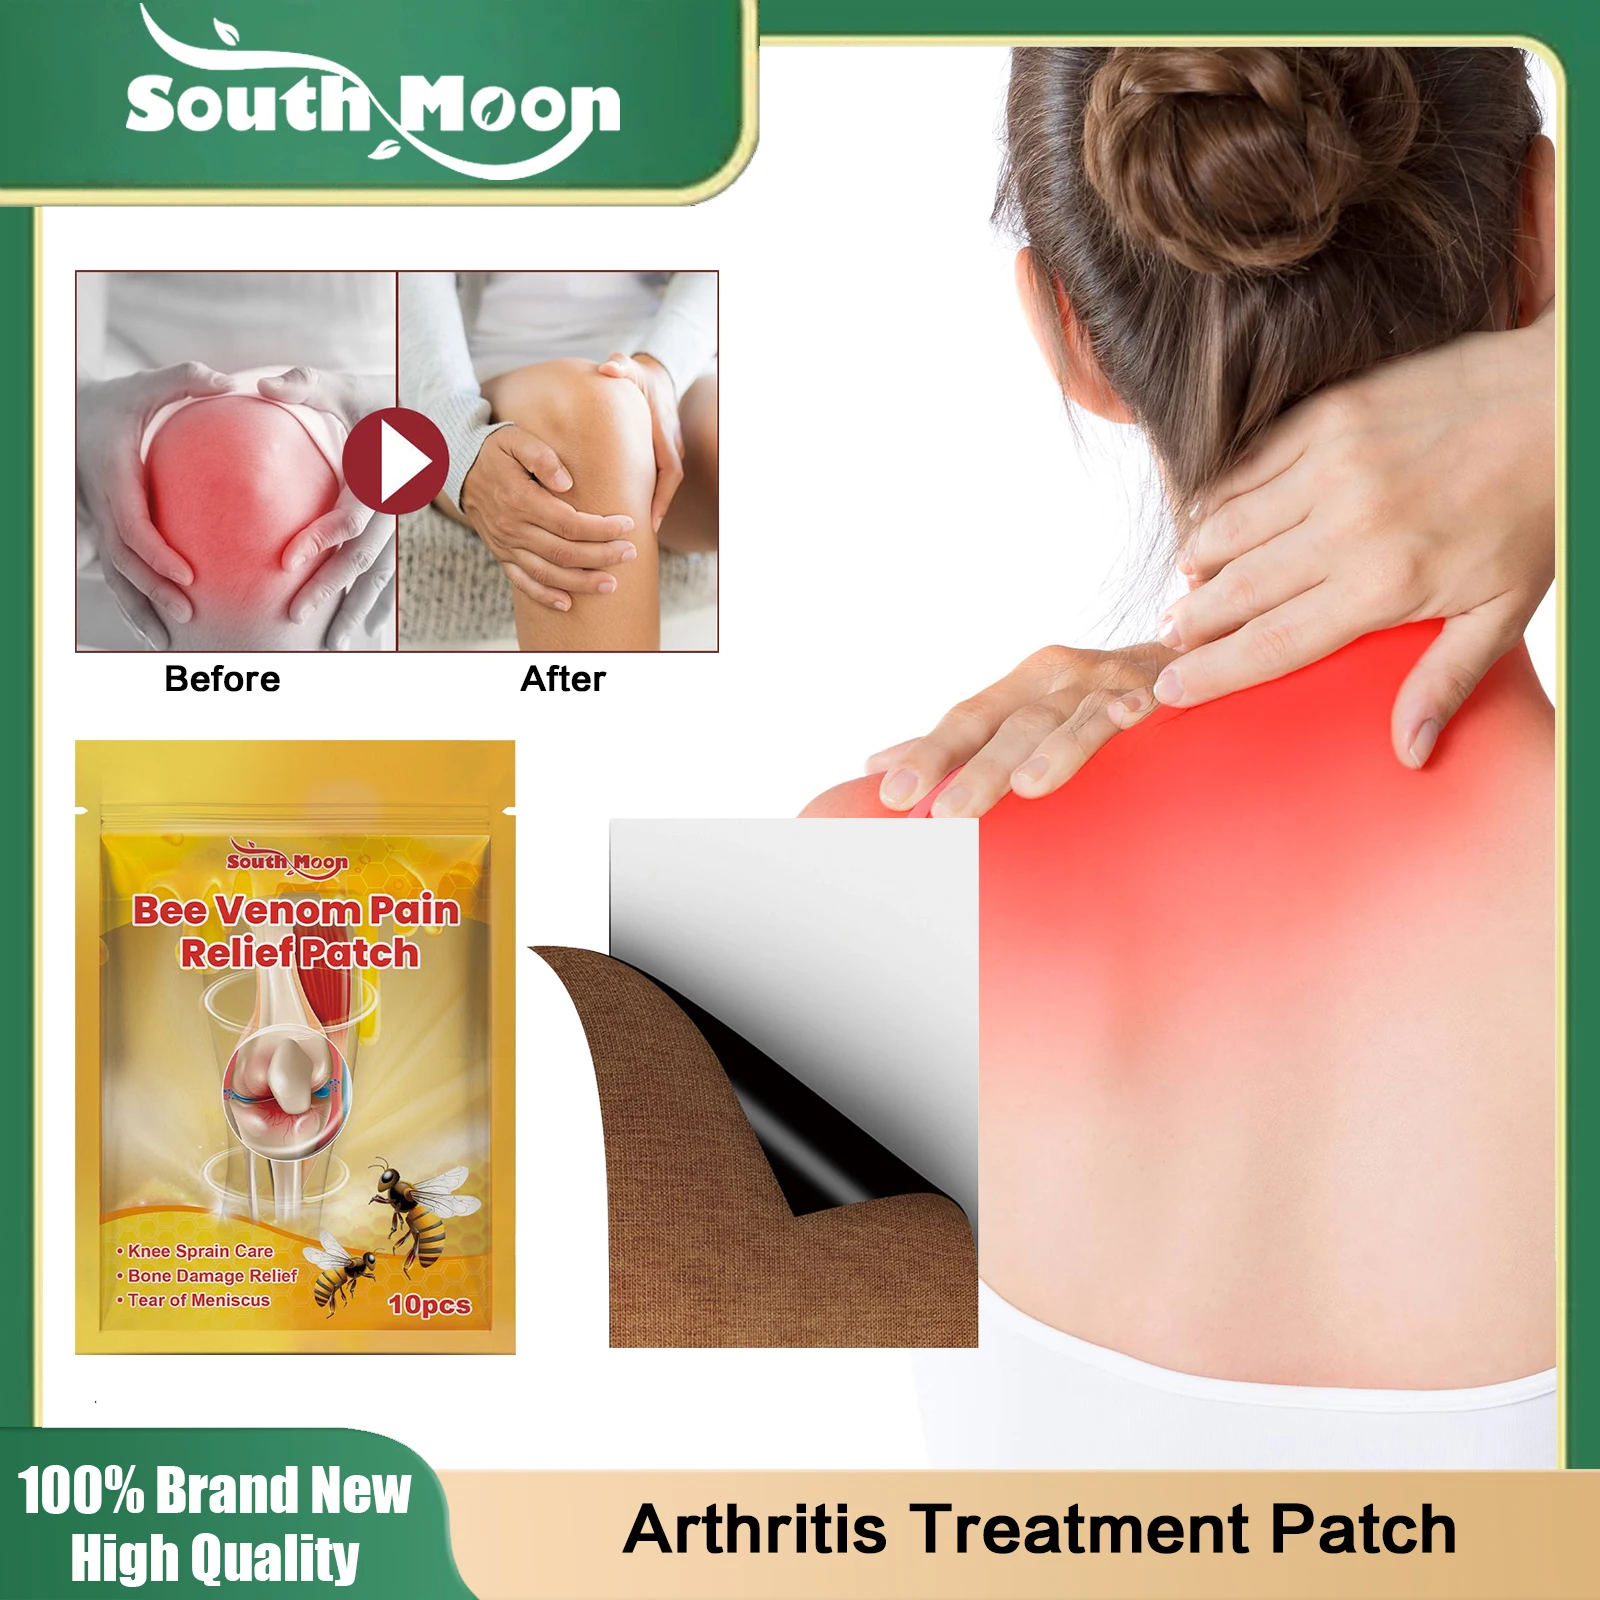 

Arthritis Treatment Patch Back Shoulder Knee Pain Relief Reduce Swelling Bruise Sprain Anti Inflammatory Joint Analgesic Sticker